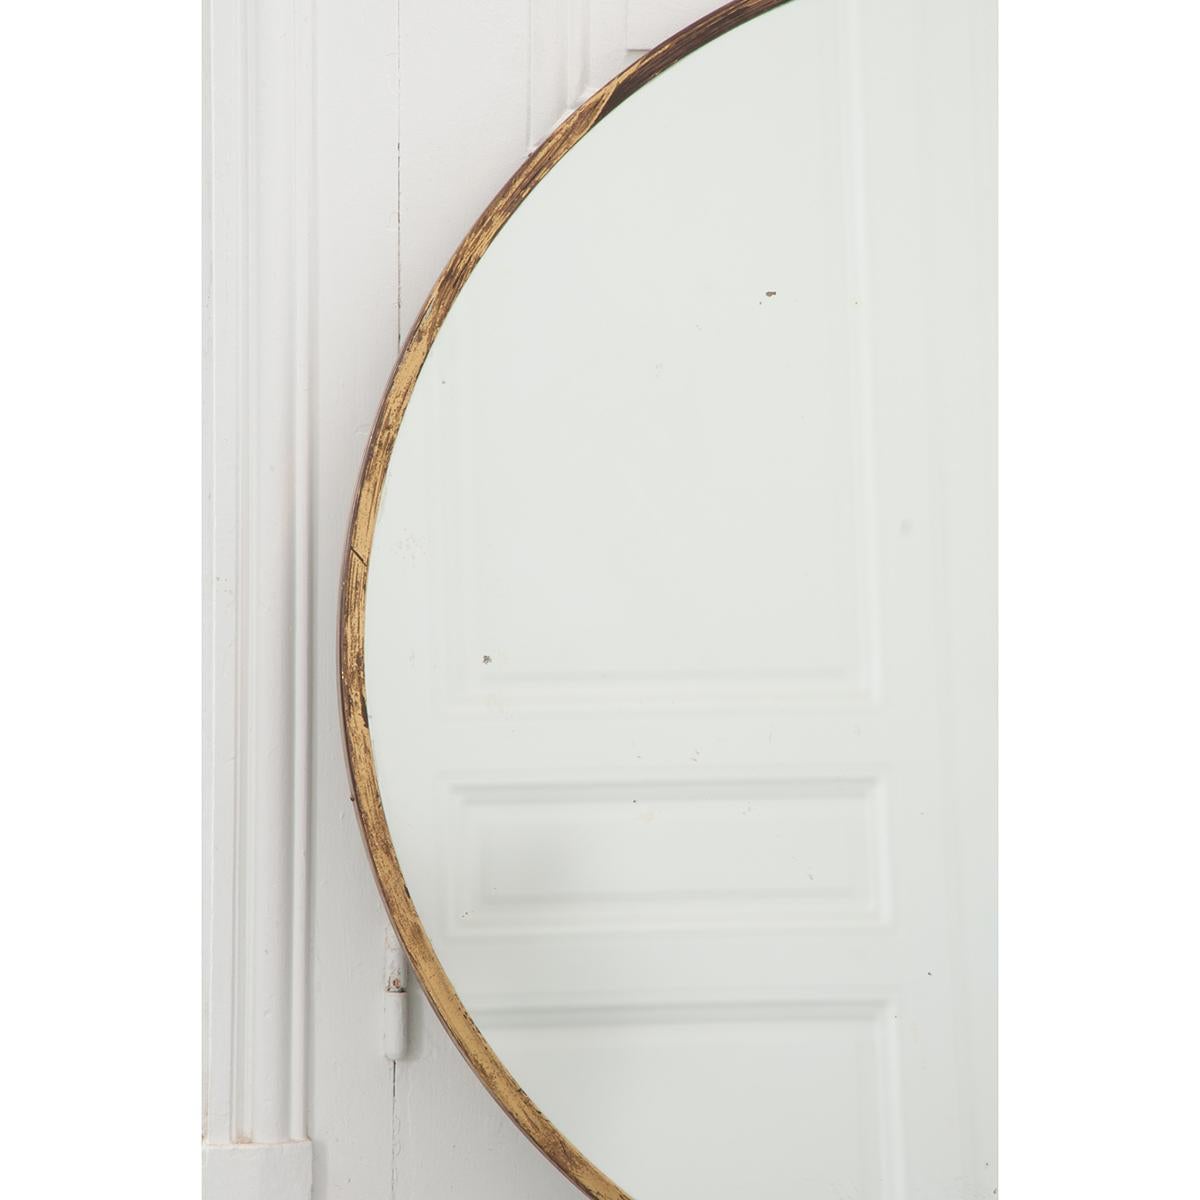 This French vintage brass edged round mirror is circa 1960. It has its original mirror plate which shows aging. The brass edge shows scratches and signs of aging also. Please be sure to view the detailed images.